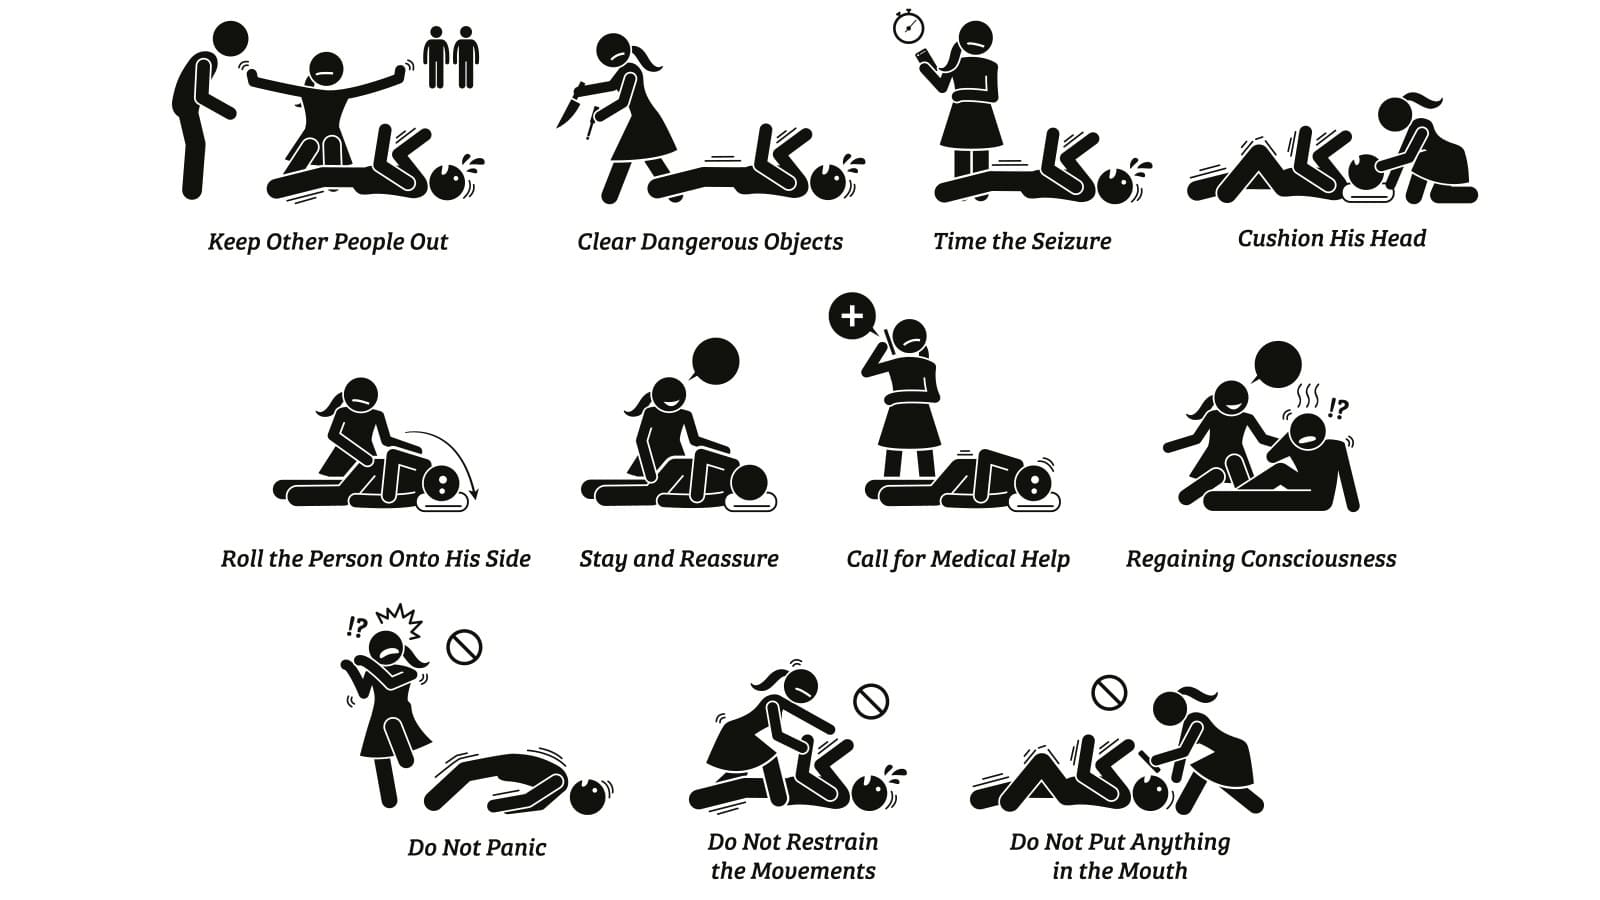 Illustration on the do’s and don’ts of seizure first aid